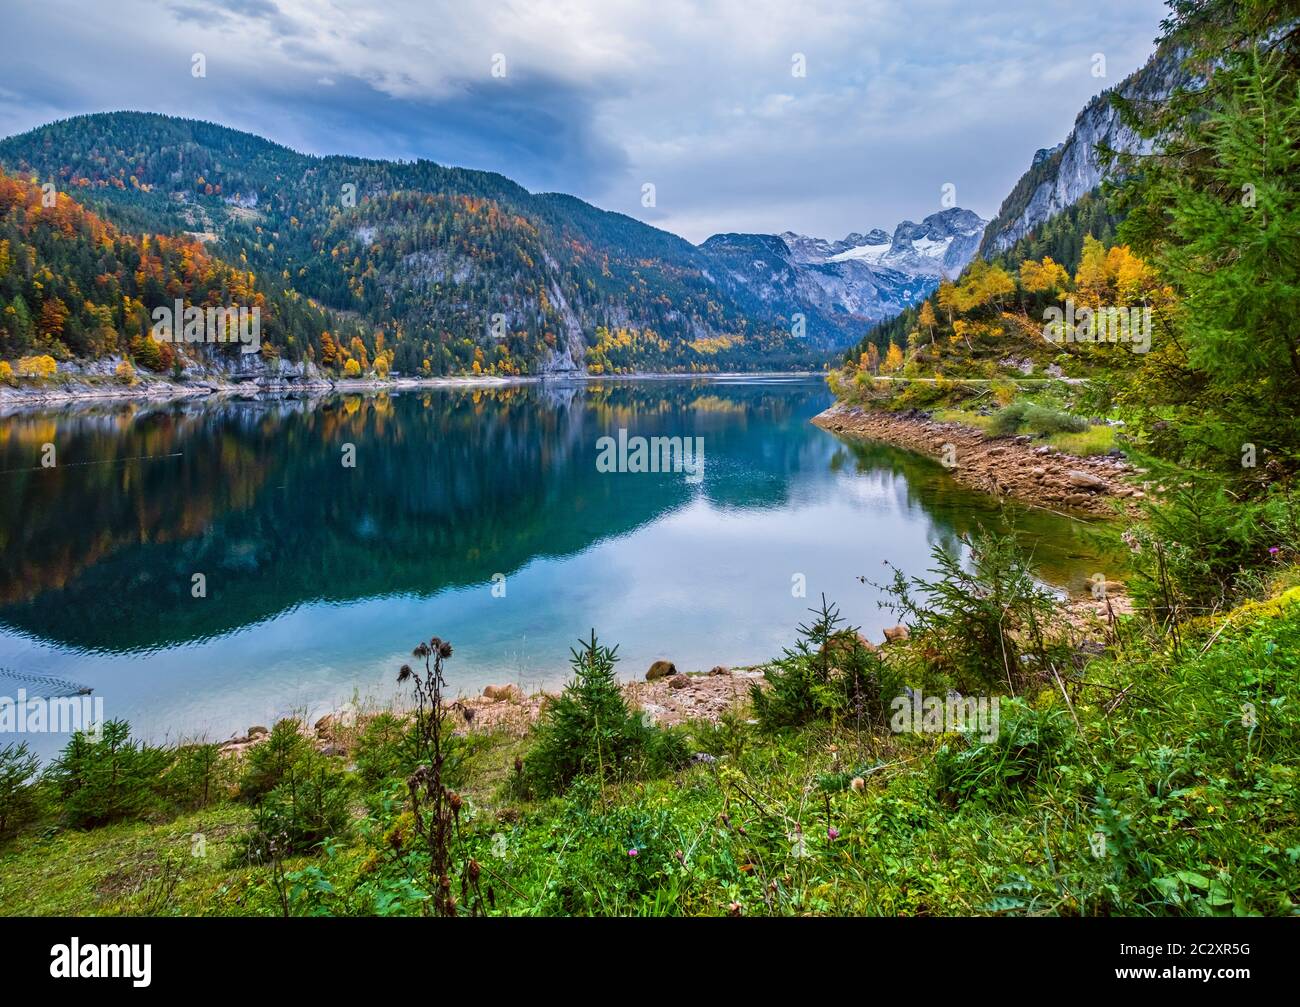 Gosauseen or Vorderer Gosausee lake, Upper Austria. Autumn Alps mountain lake with clear transparent water and reflections. Stock Photo